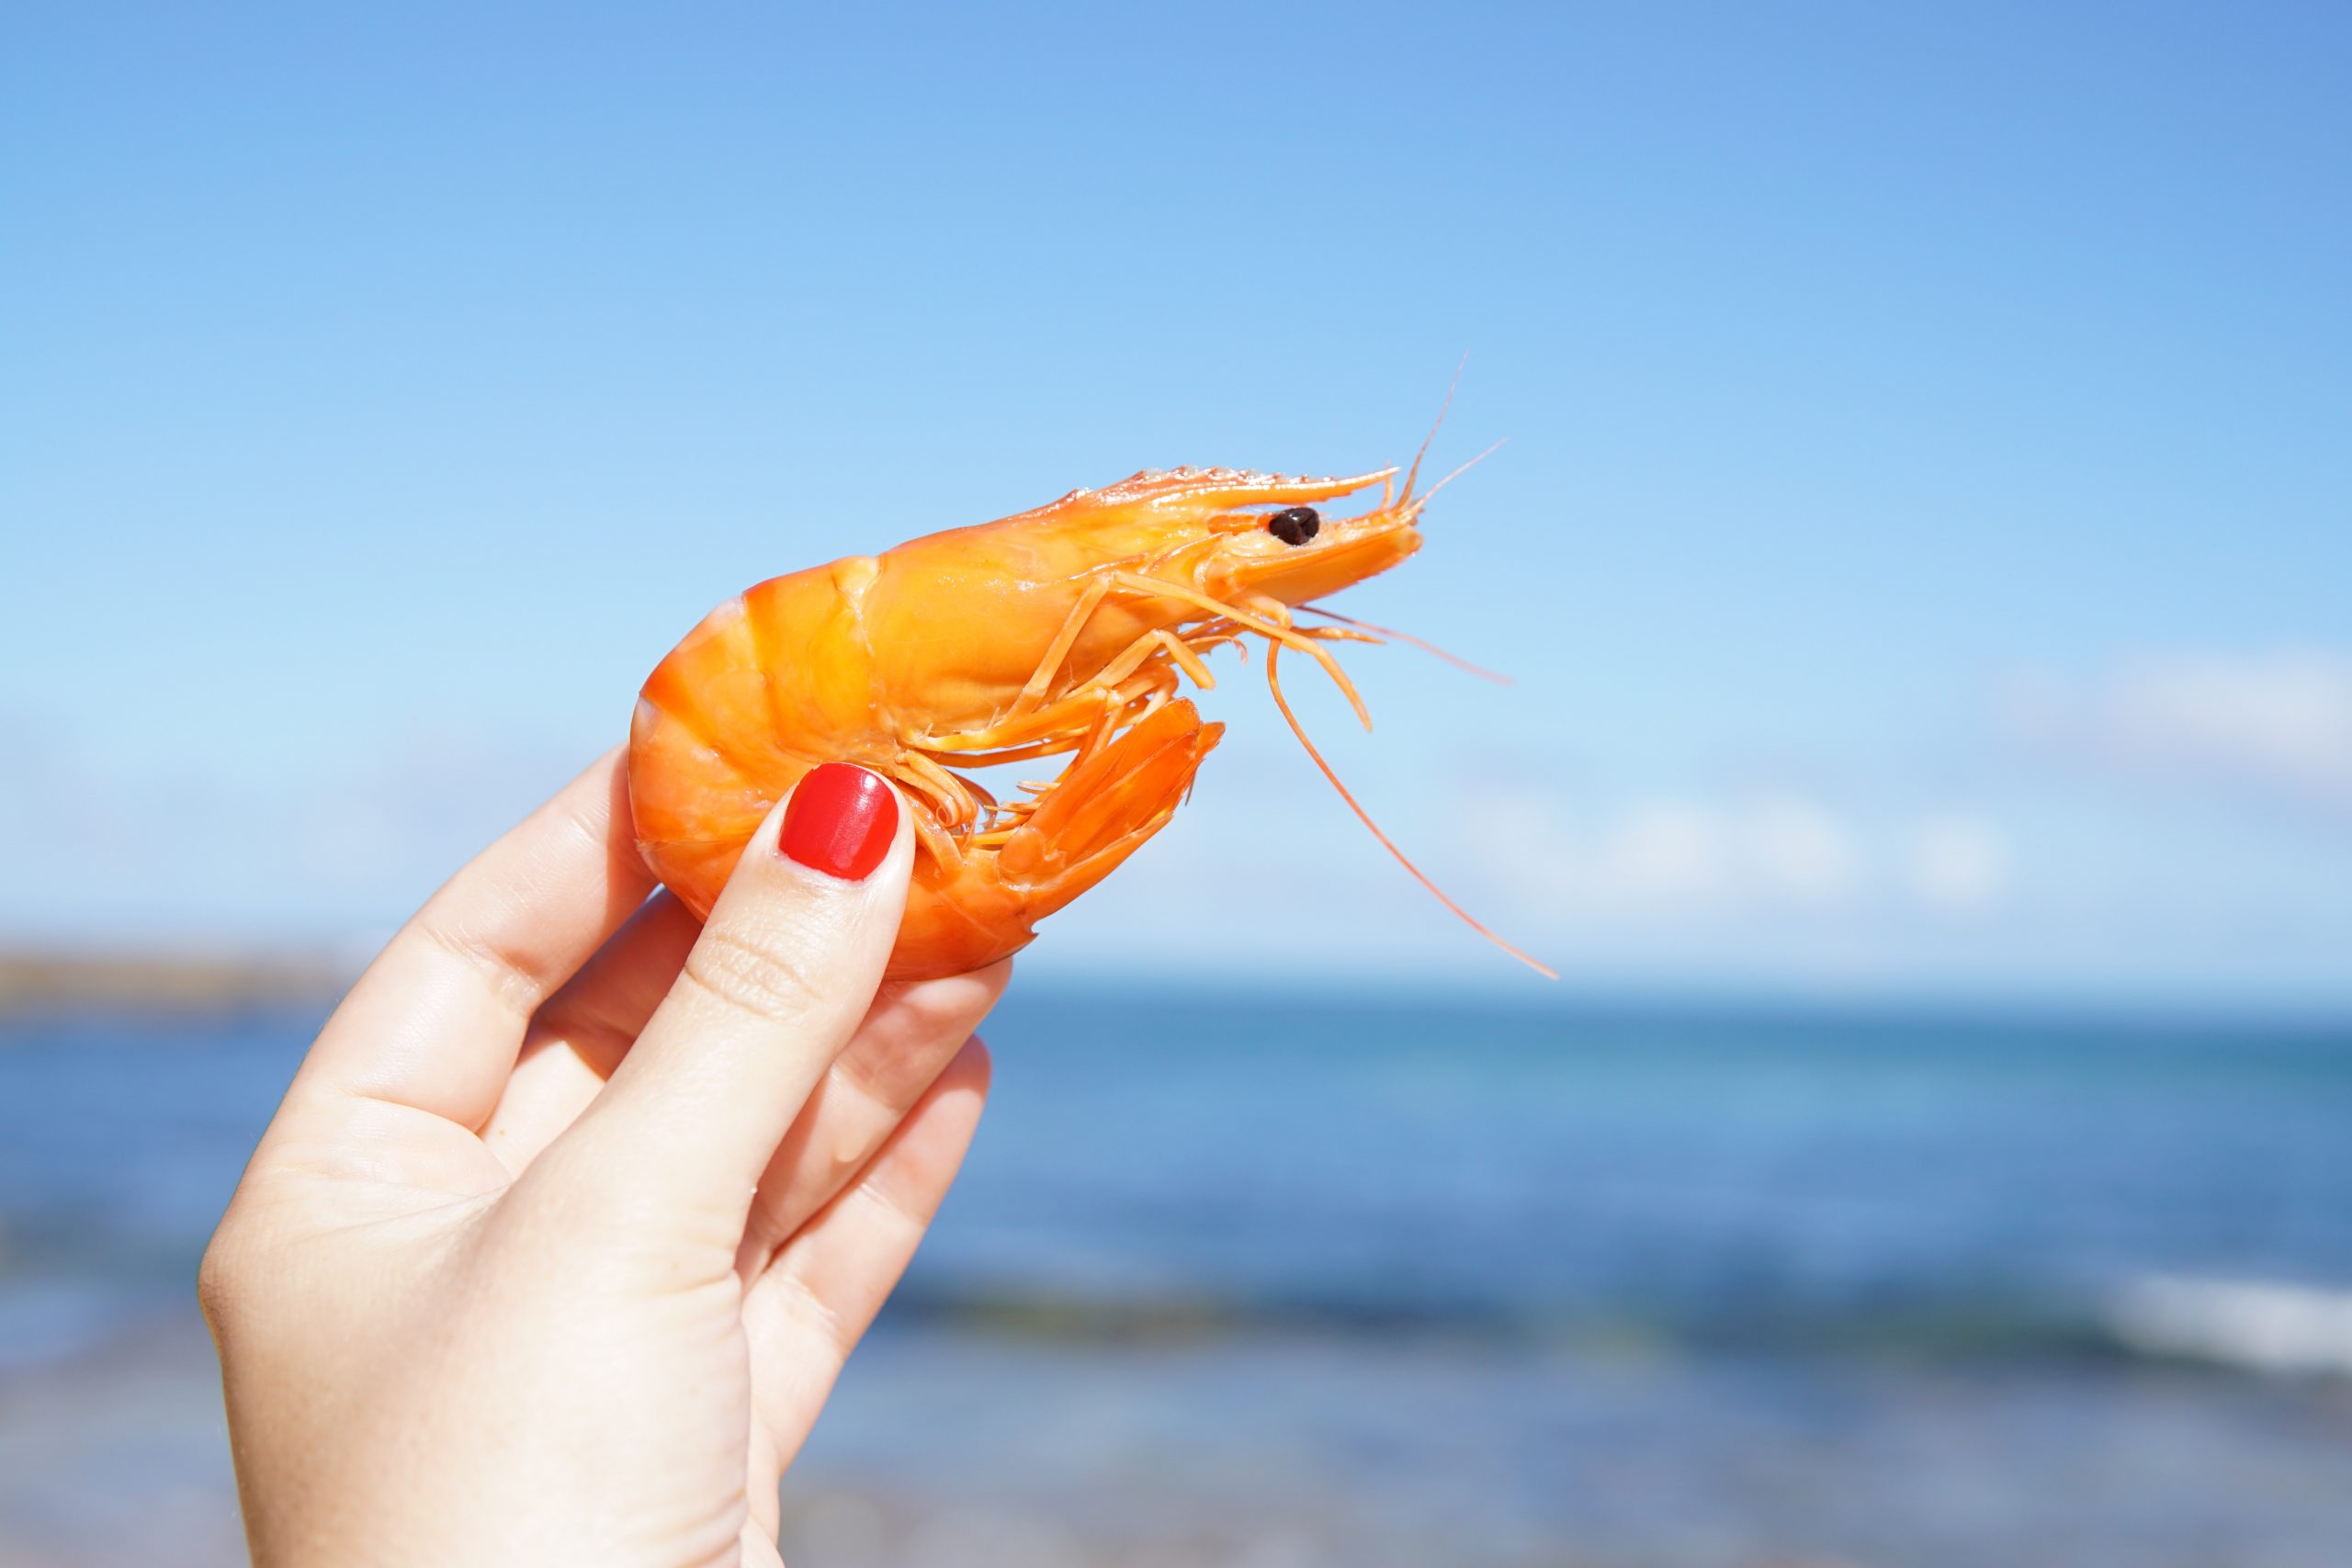 ‘If it’s Aussie, it’s good’: Australia’s seafood industry welcomes Sustainable Seafood Week